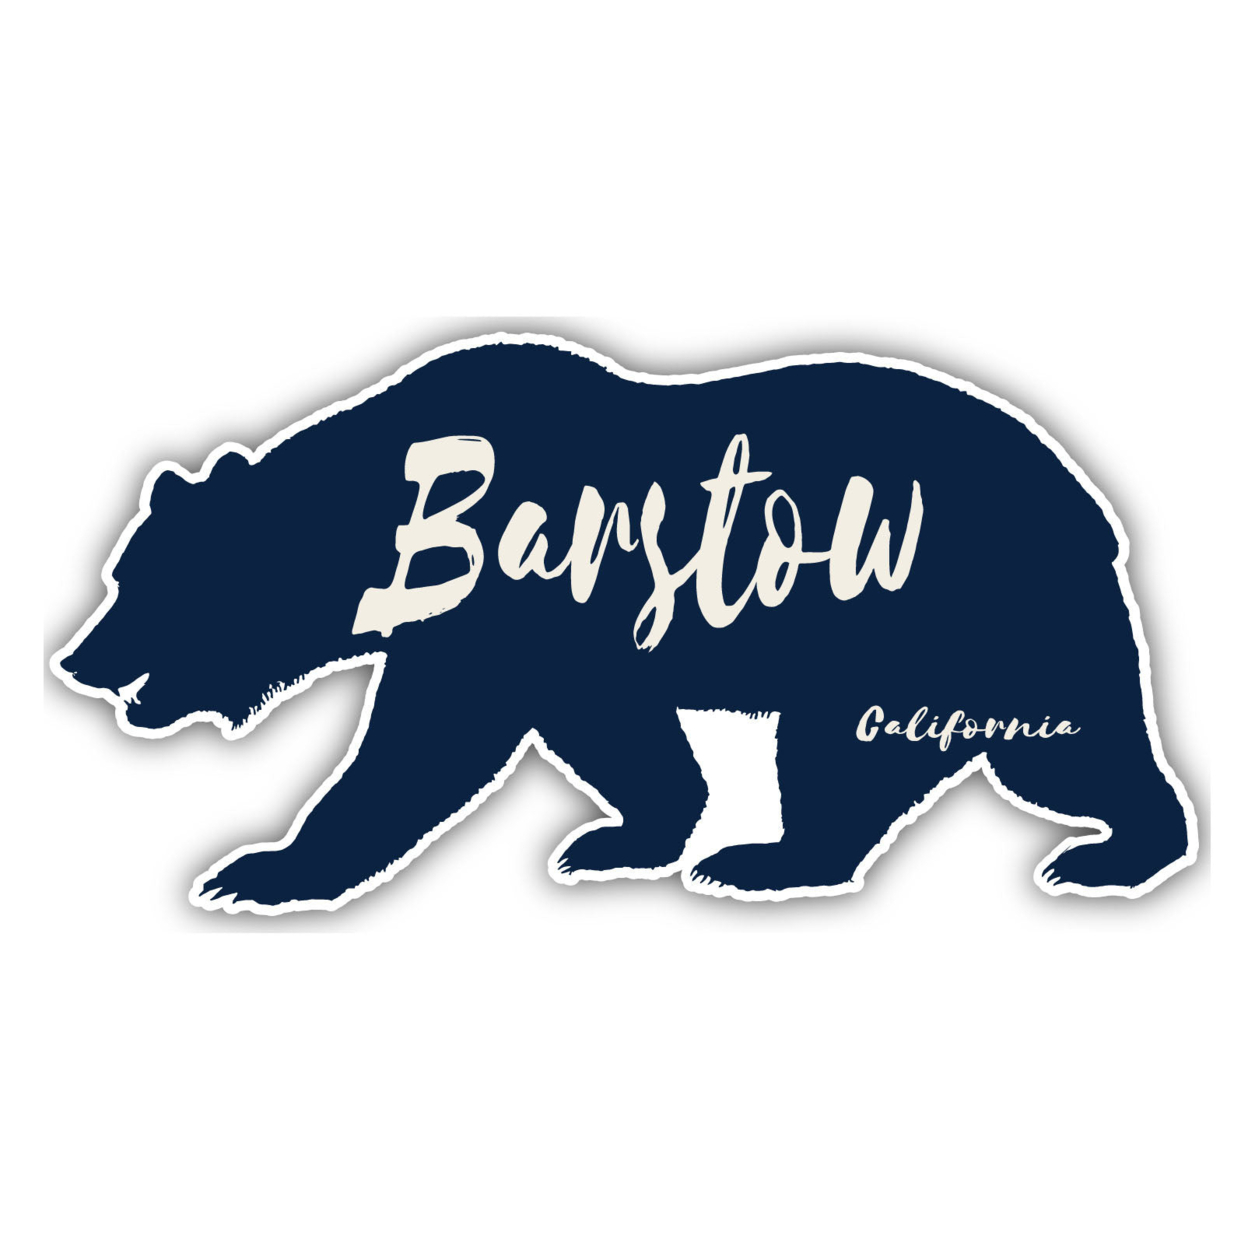 Barstow California Souvenir Decorative Stickers (Choose Theme And Size) - 4-Pack, 8-Inch, Bear